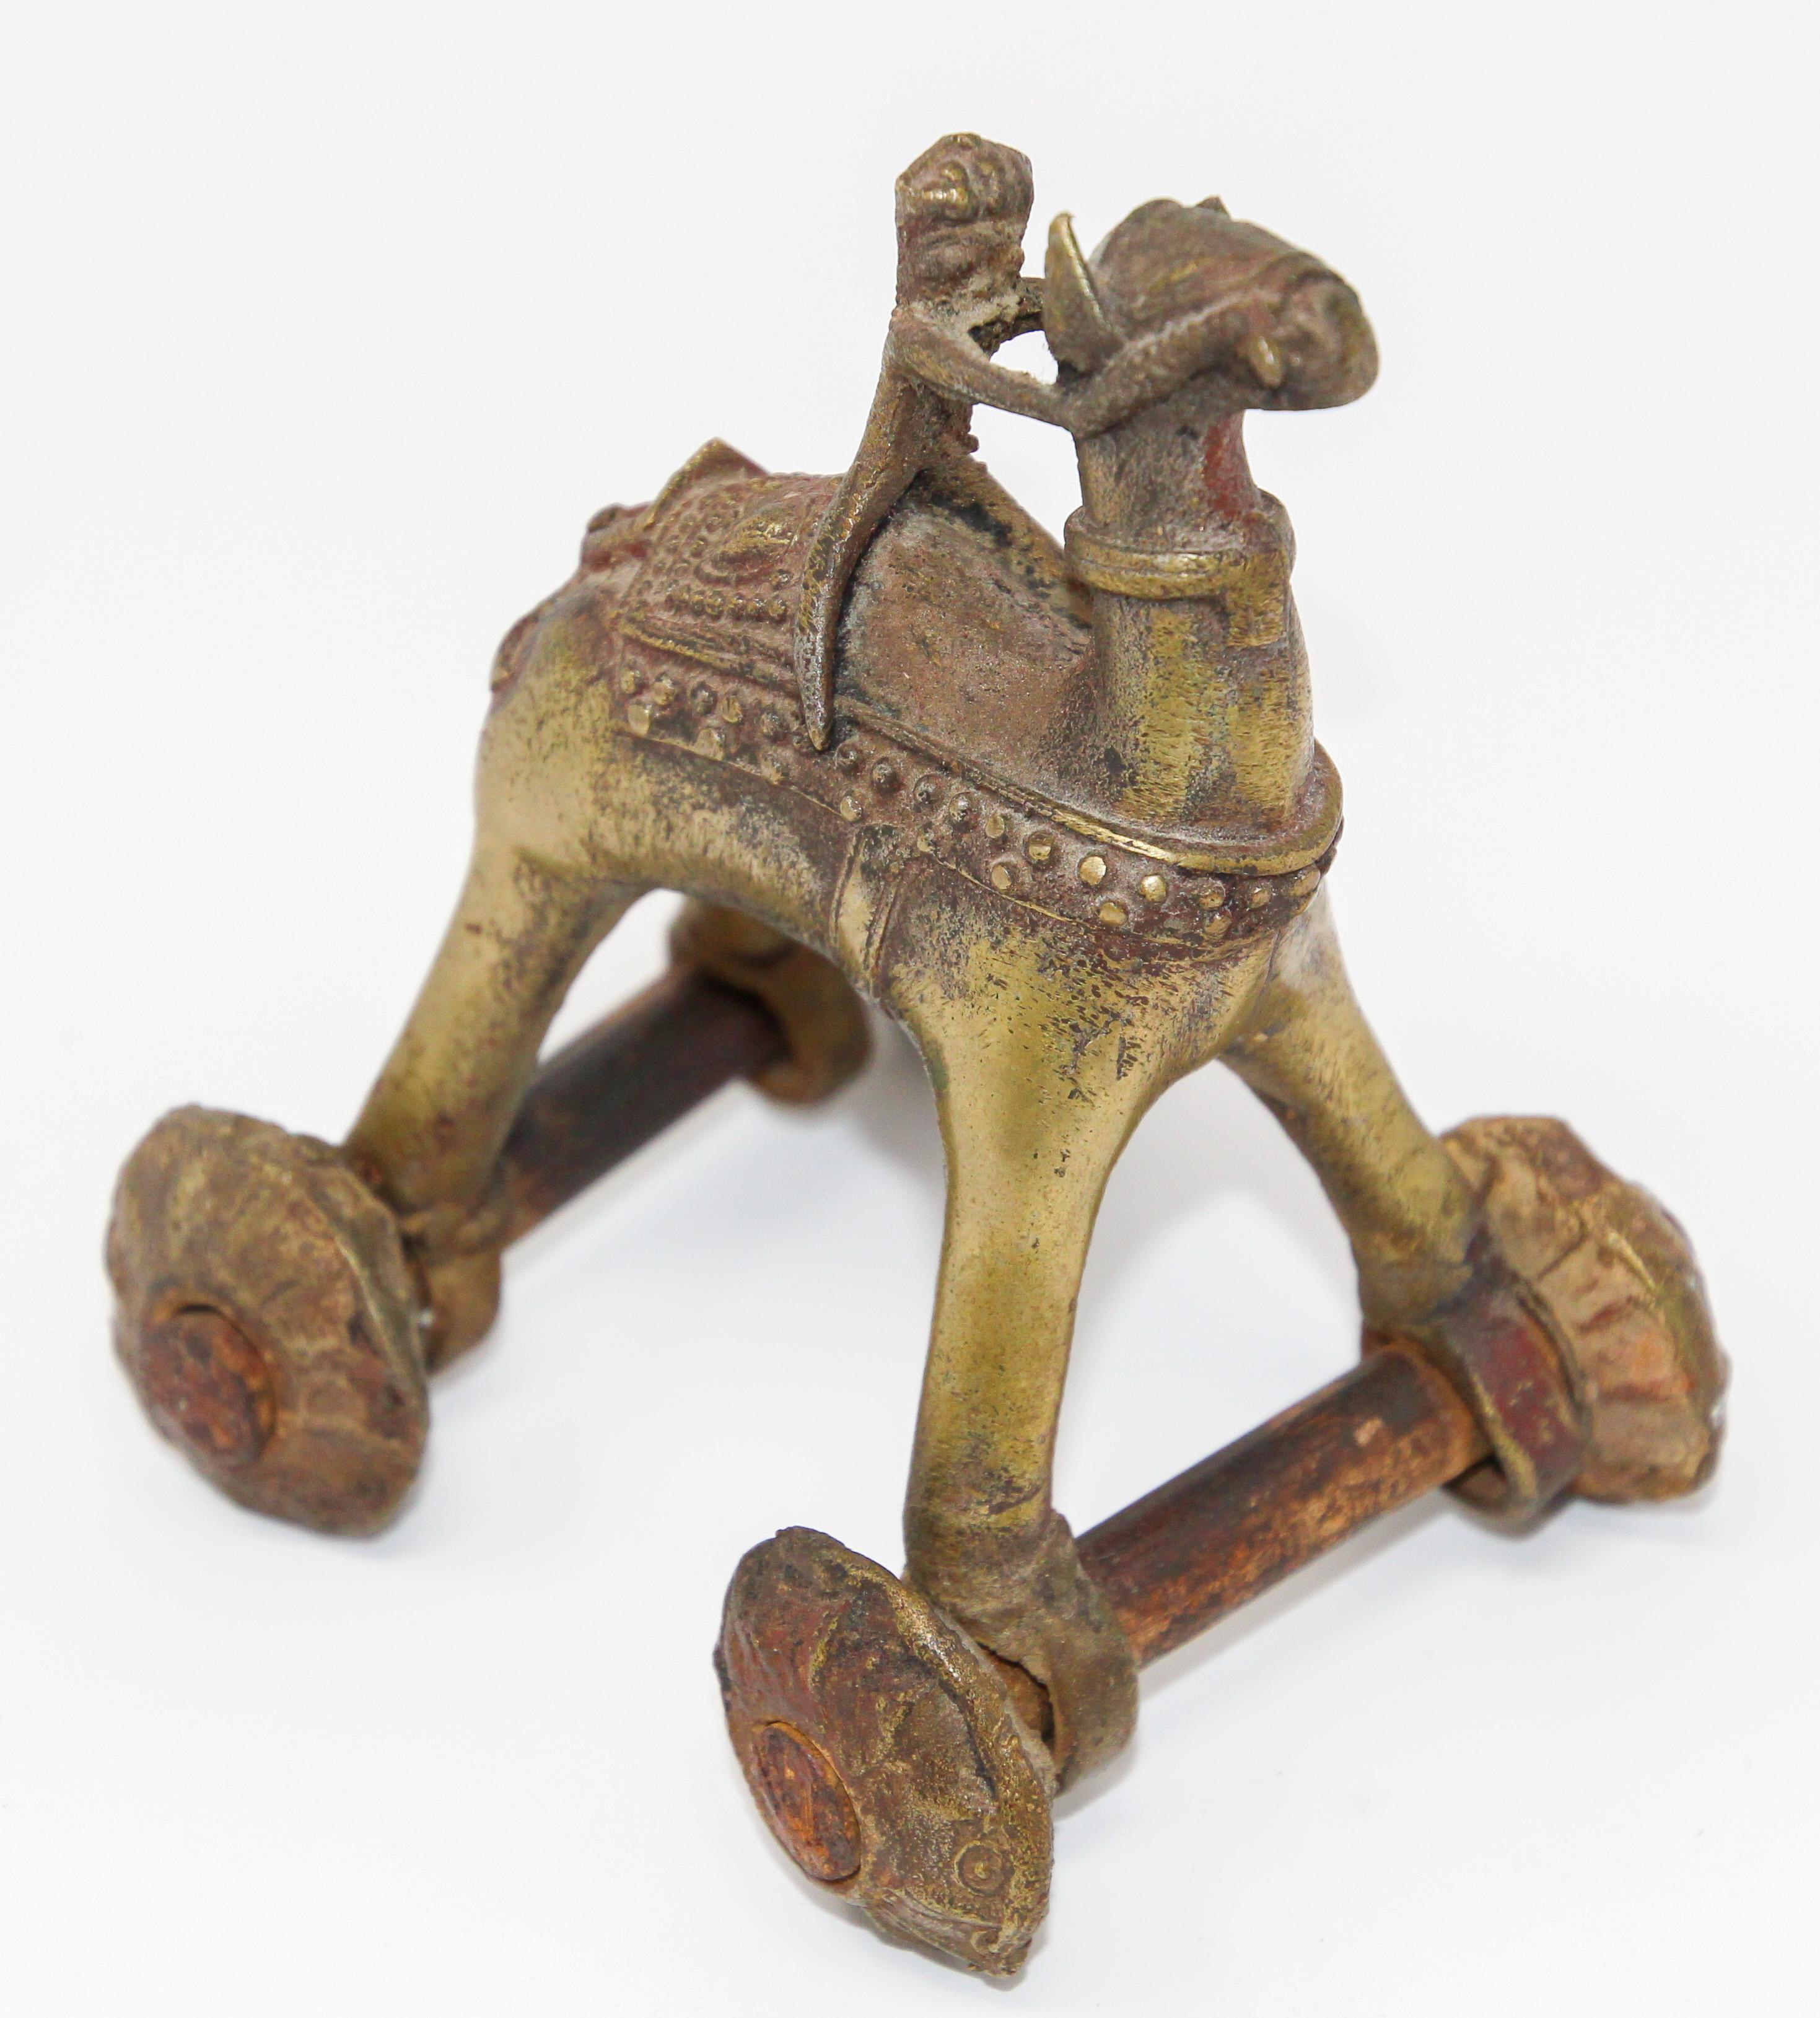 Inspired by a scene from Ramakian or Ramayan, the Indian epic Rama and Sita.
Antique Indian Temple Toy bronze camel on wheels.
Antique hindu bronze temple camel with rider statue toy on wheels.
Commonly known as 